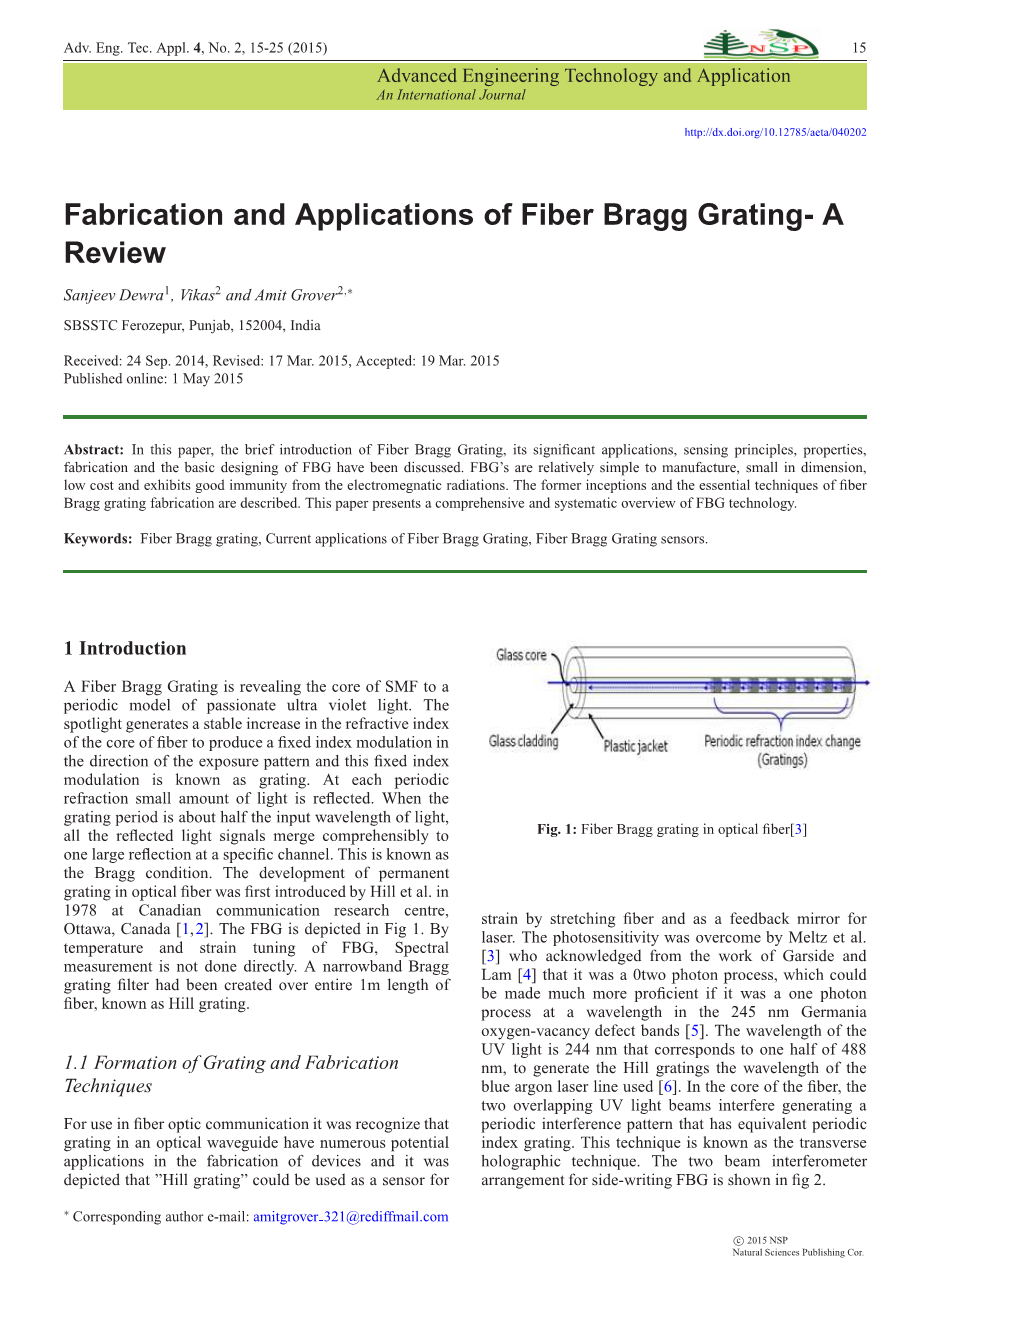 Fabrication and Applications of Fiber Bragg Grating- a Review